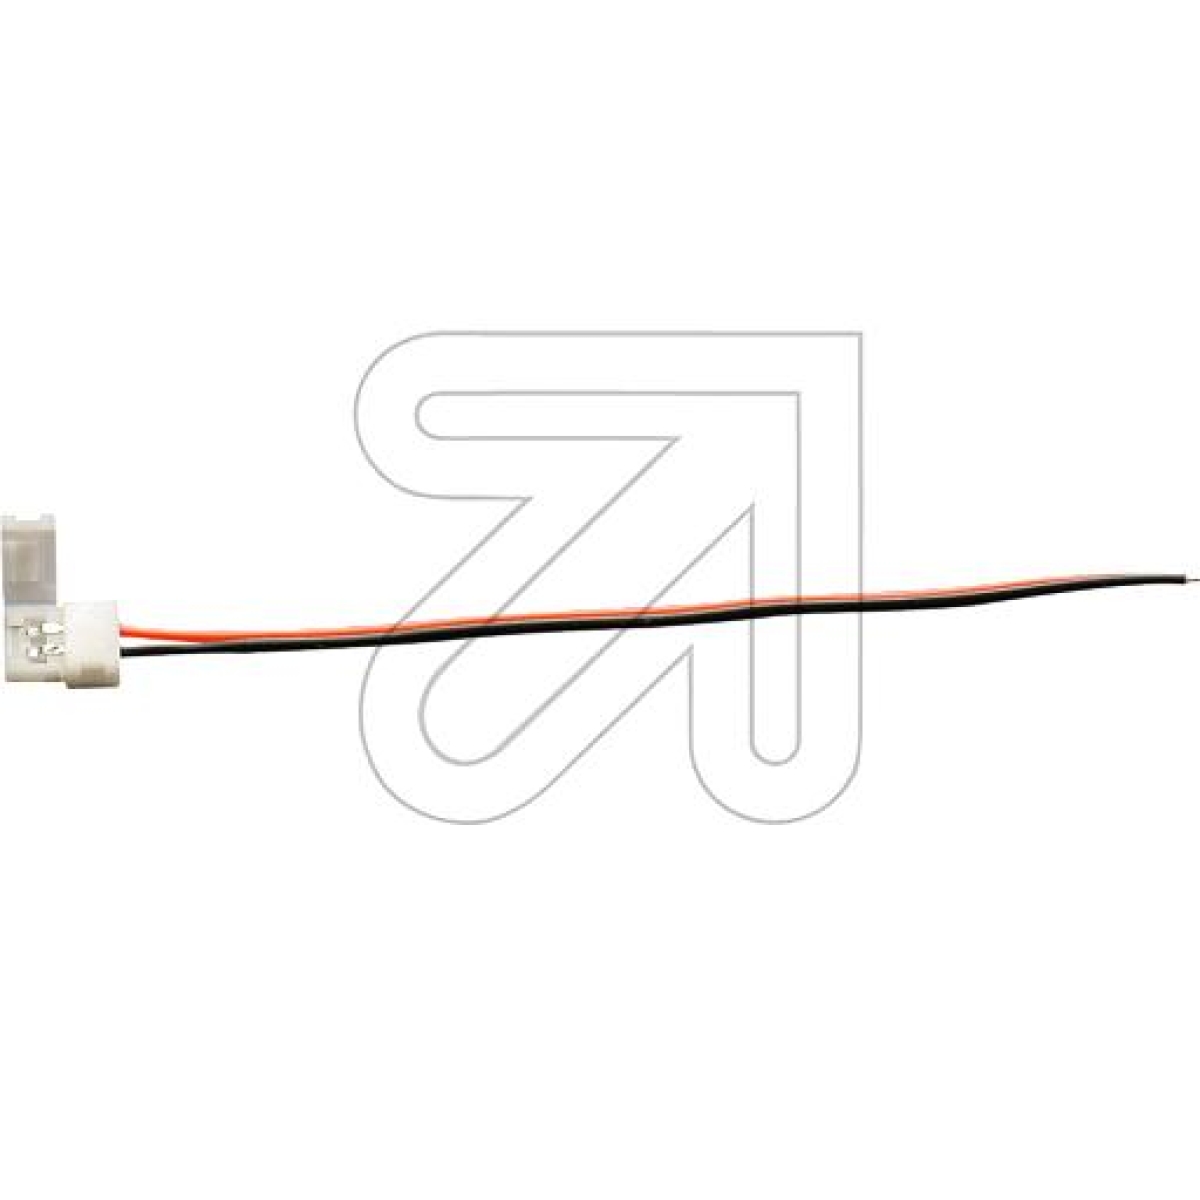 EGBclip-flex feed for LED strips 8mmArticle-No: 686435